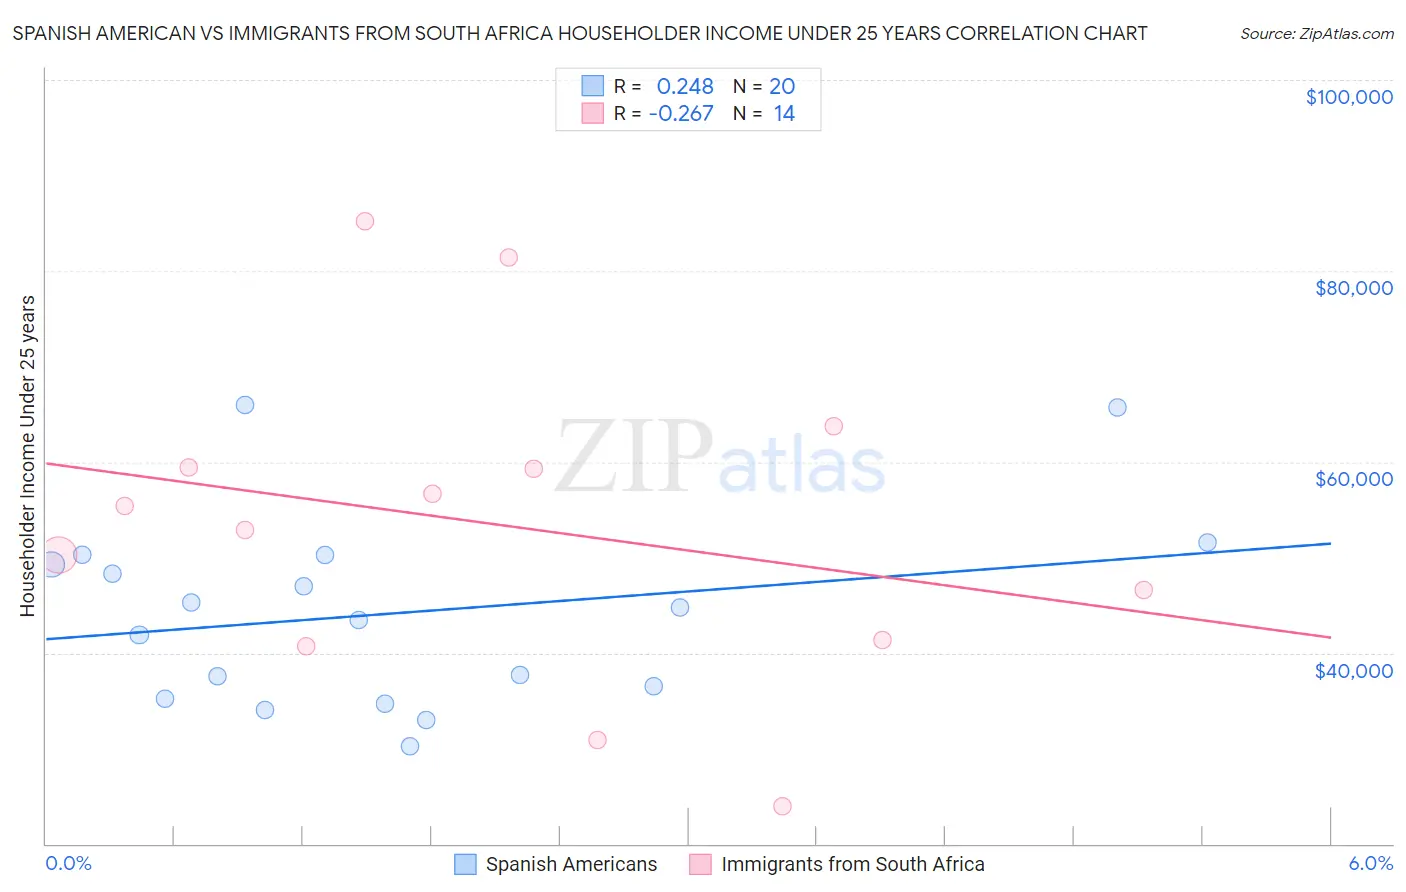 Spanish American vs Immigrants from South Africa Householder Income Under 25 years